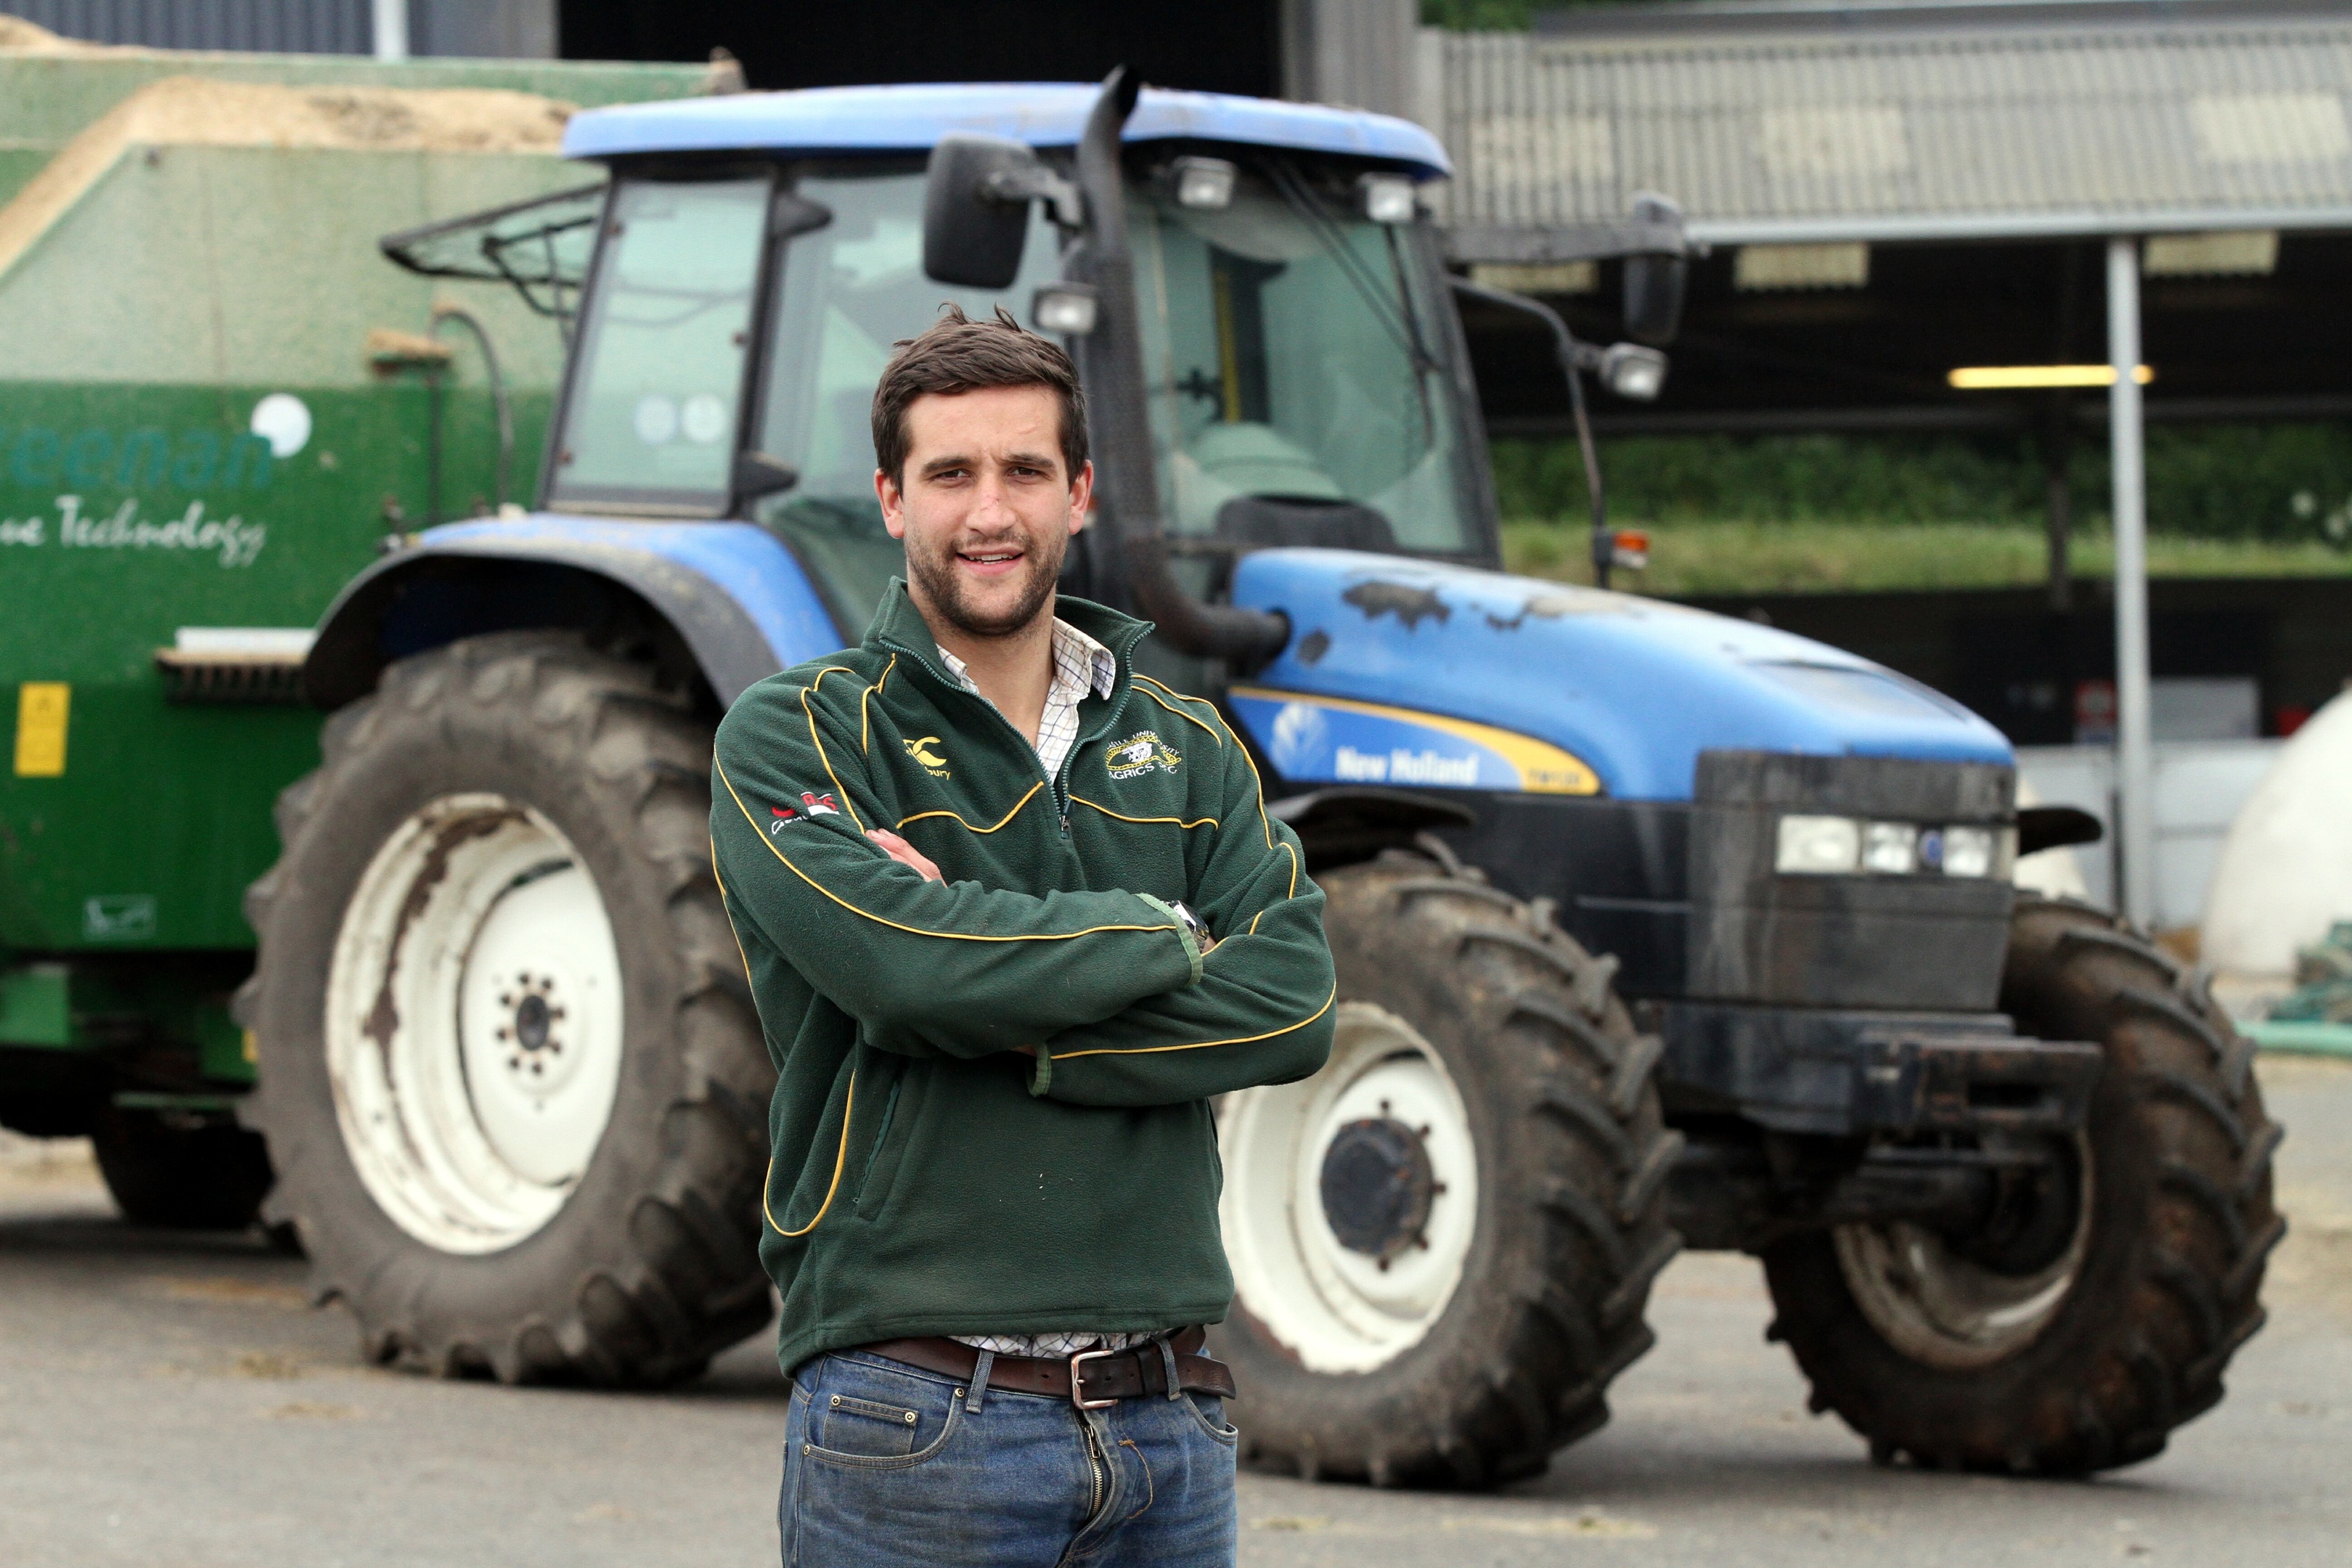 The farming industry needs to engage  with young people who have little or no agricultural experience